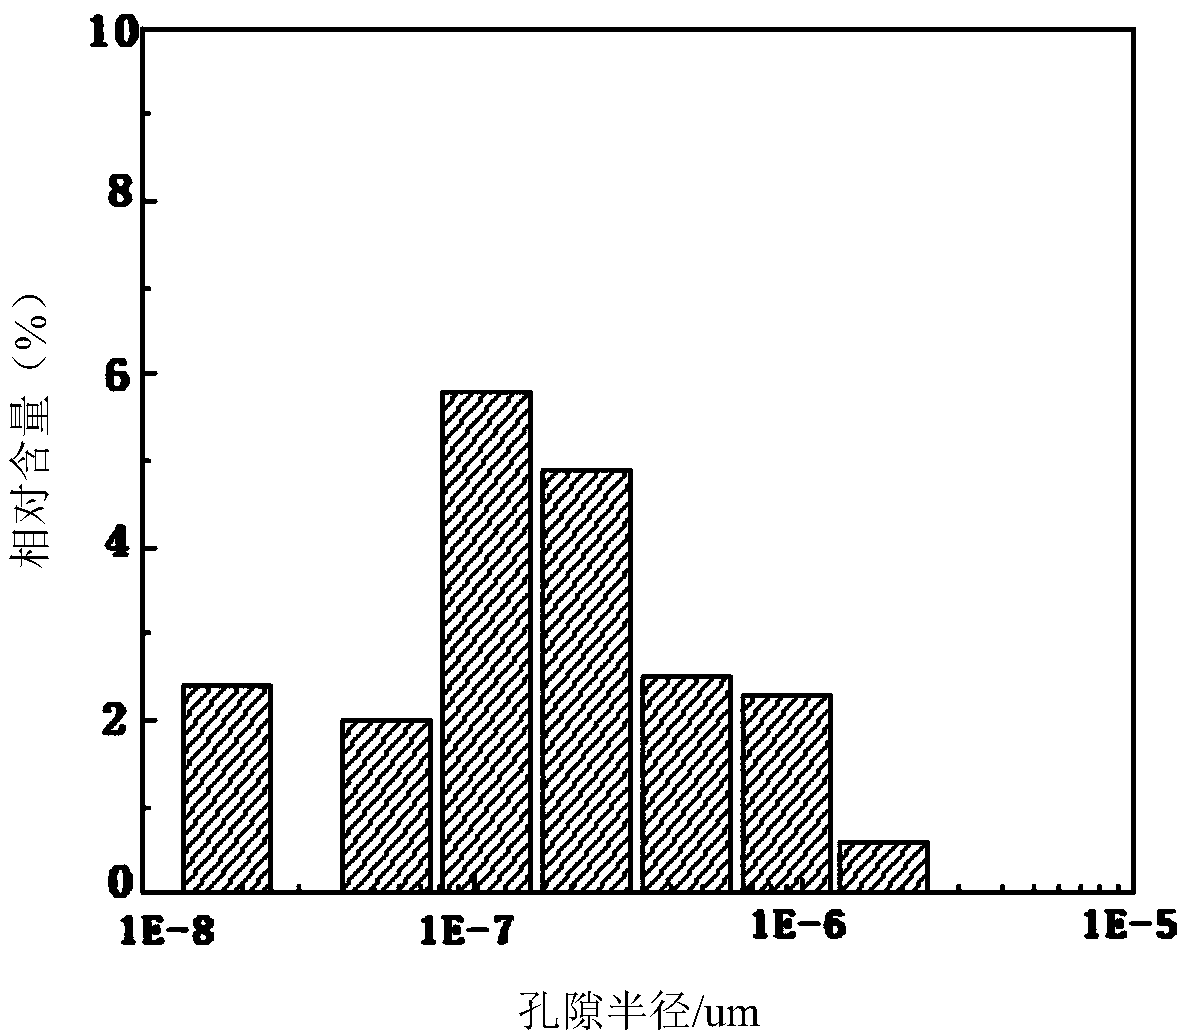 A method of correcting the NMR porosity of igneous rocks using a chart